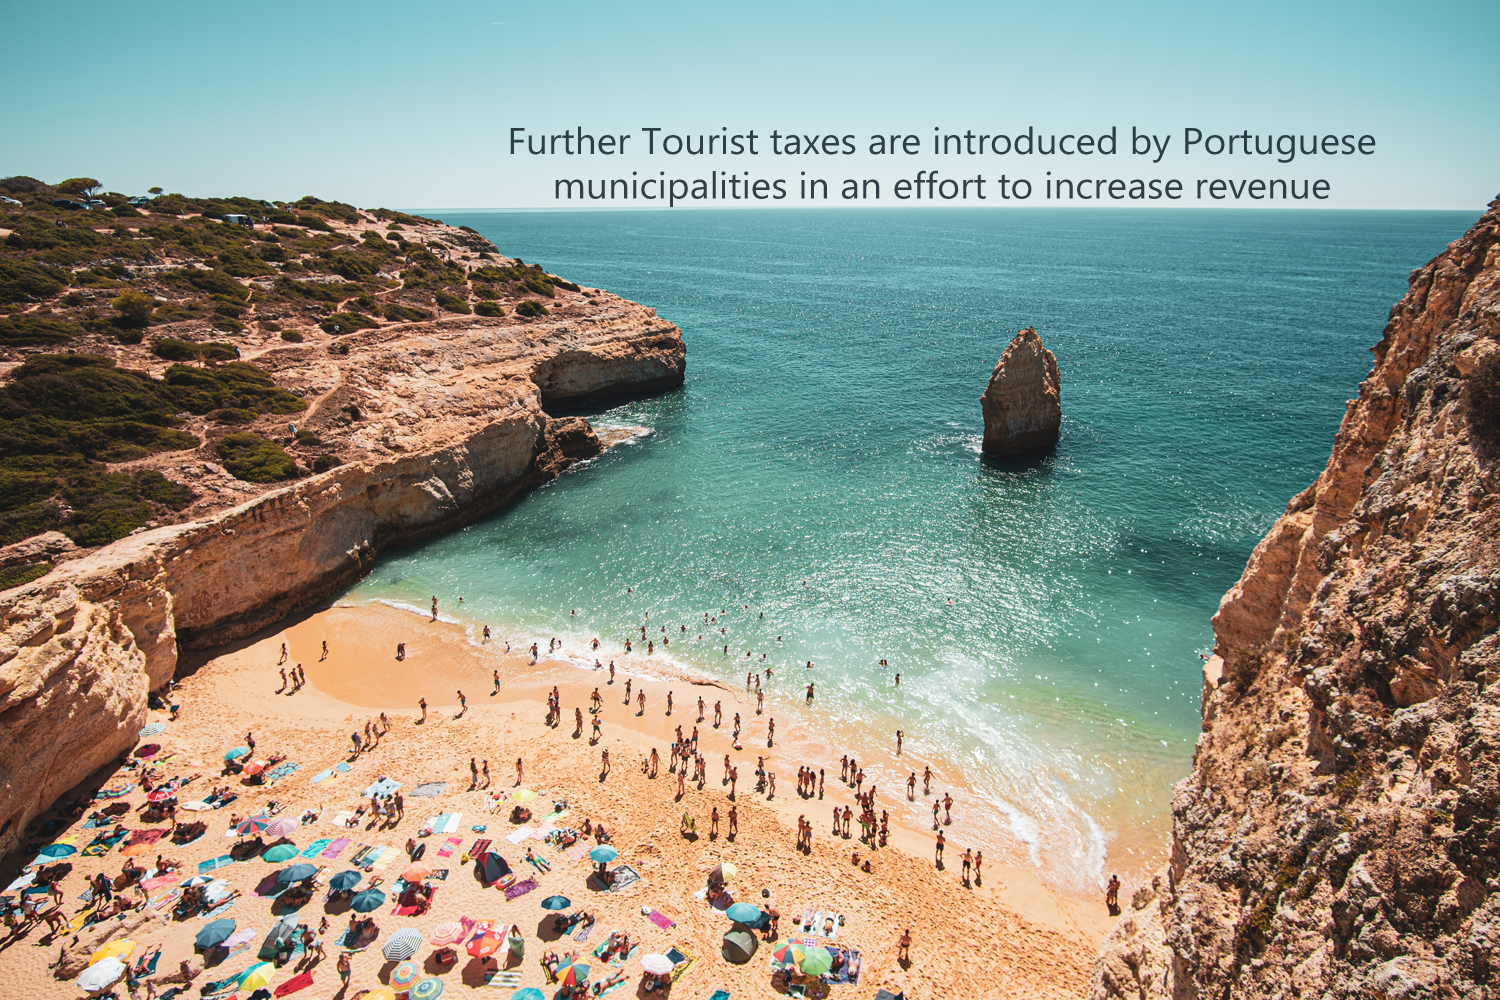 Further Tourist taxes are introduced by Portuguese municipalities in an effort to increase revenue.